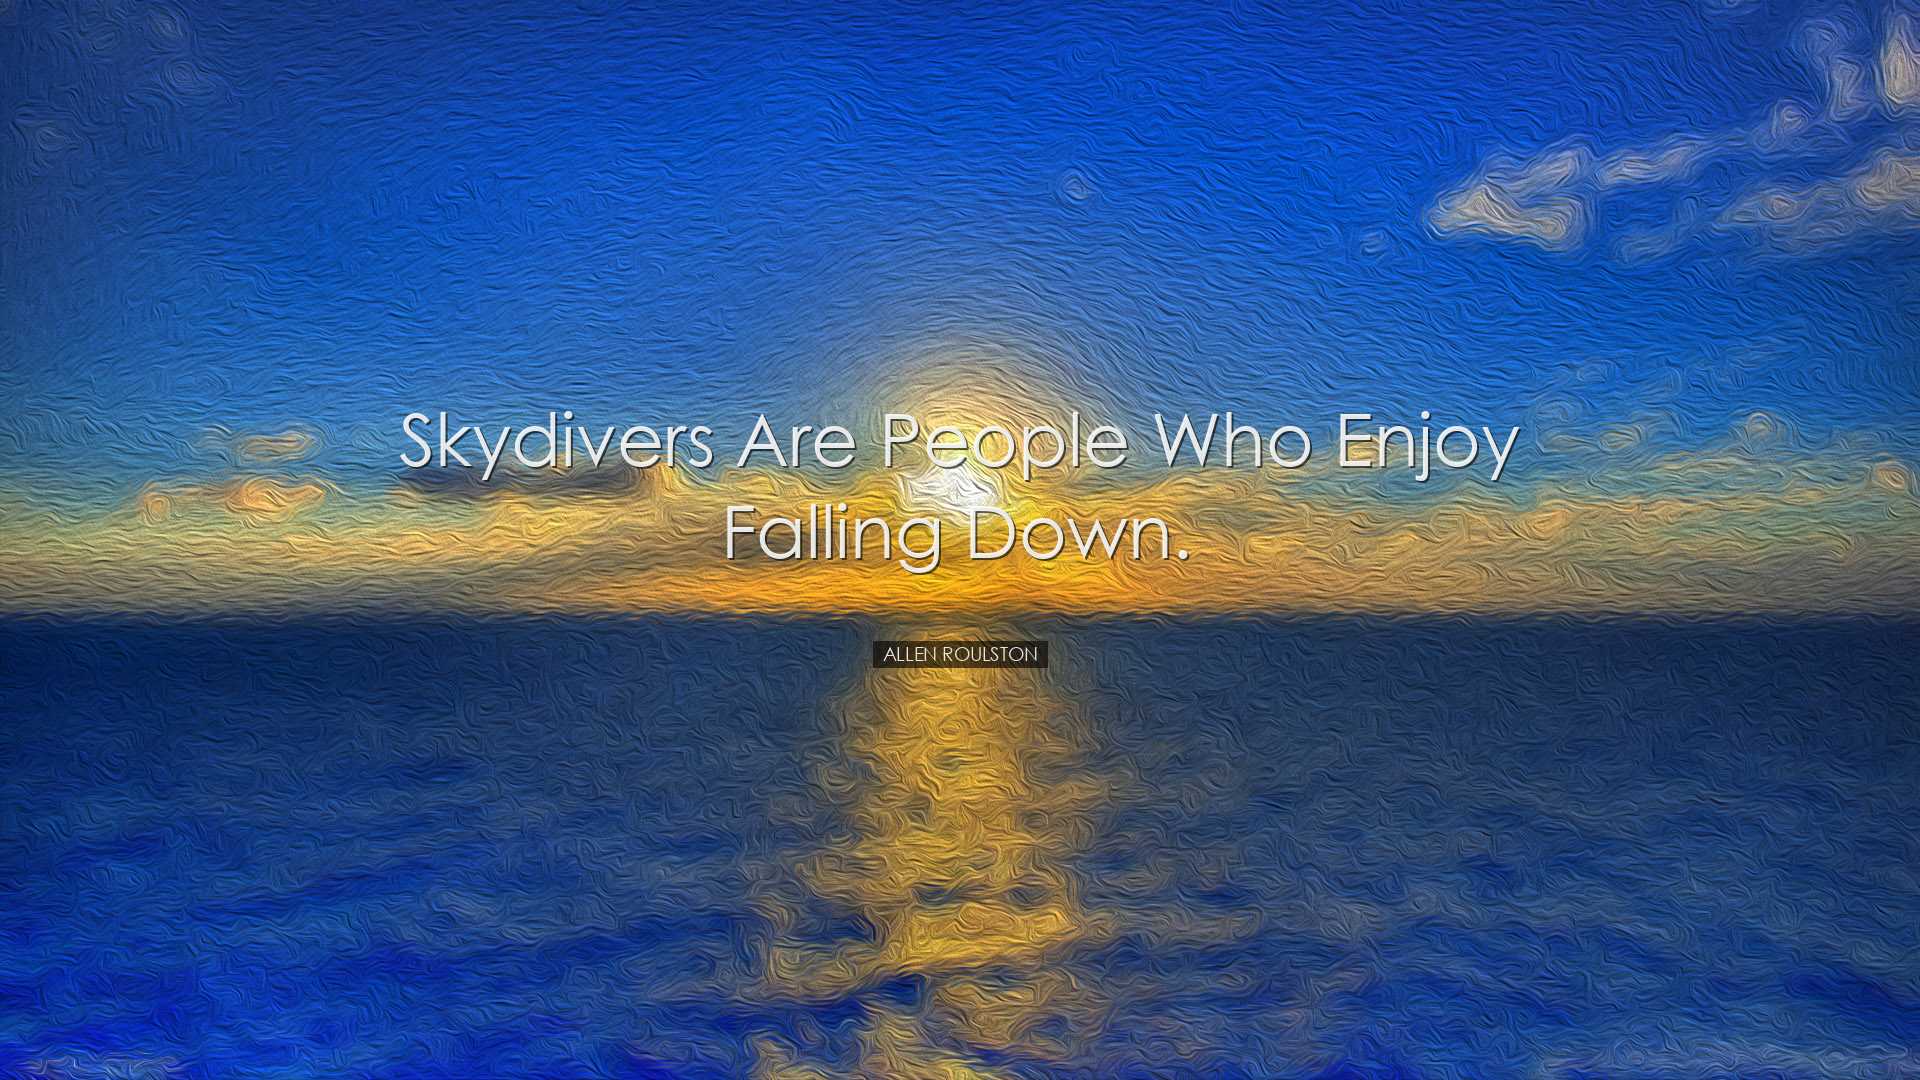 Skydivers are people who enjoy falling down. - Allen Roulston